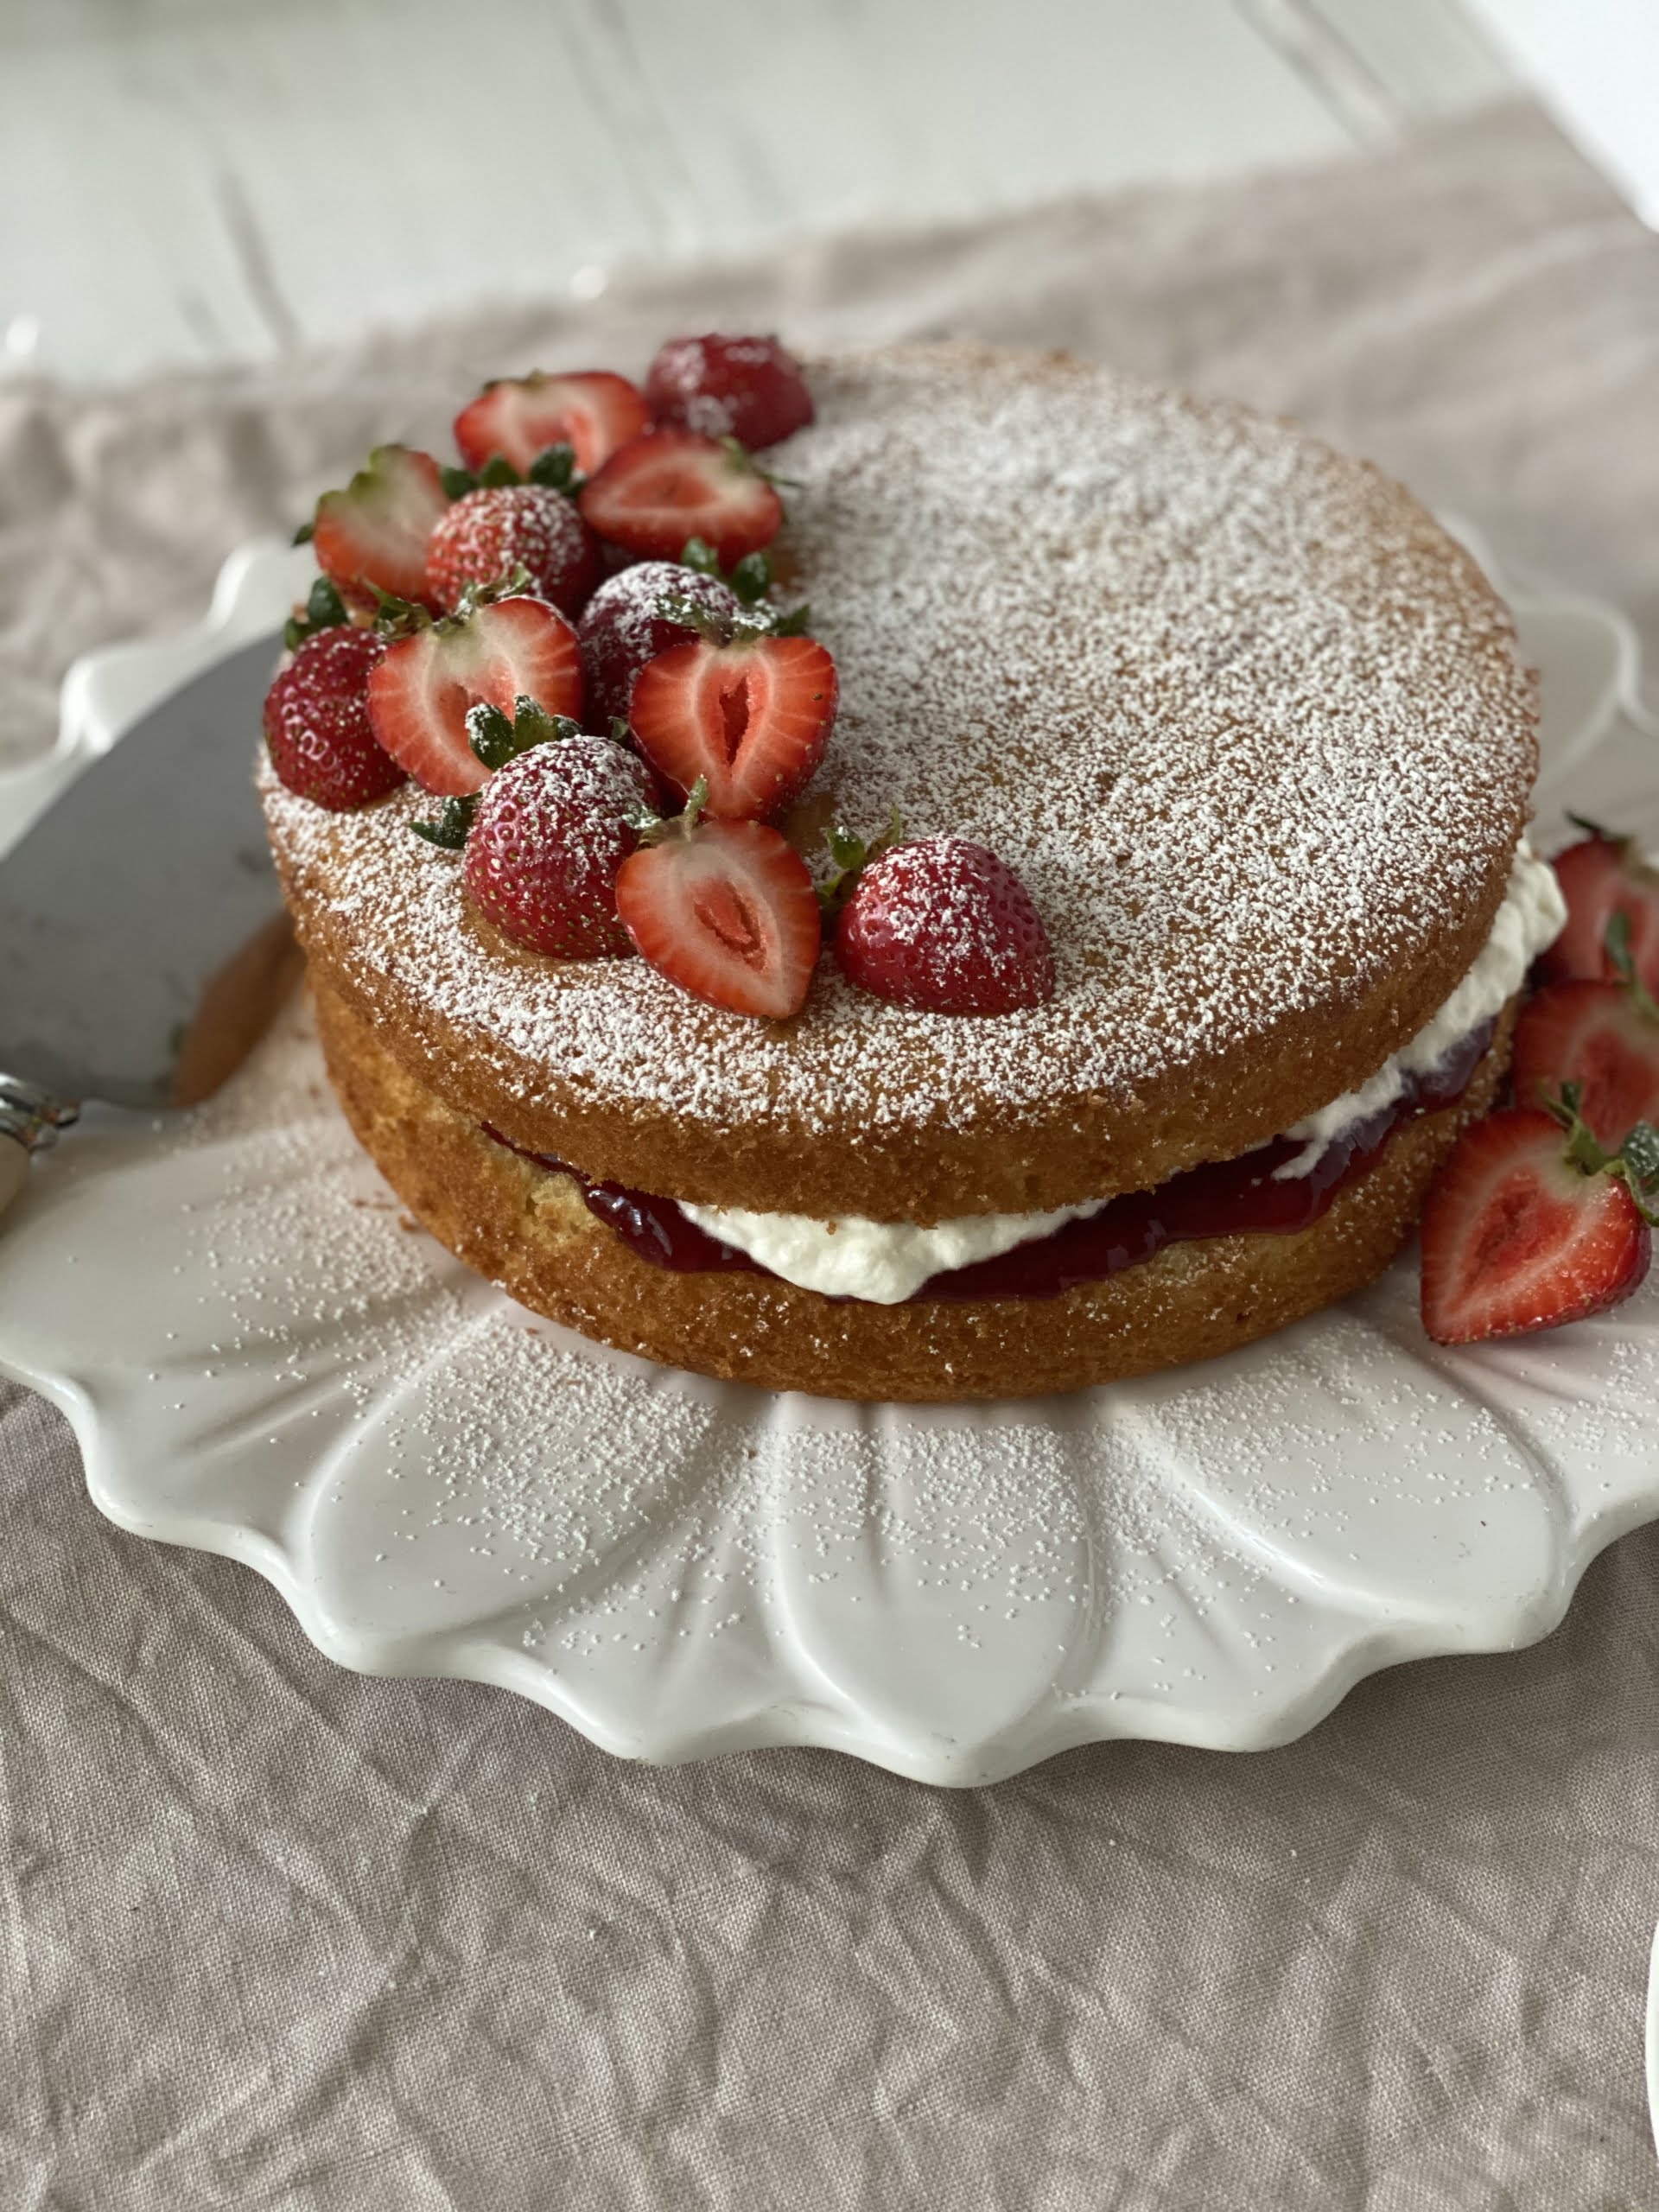 Victoria sponge cake, angle shot of cake on cake plate, decorated with strawberries and with serving knife